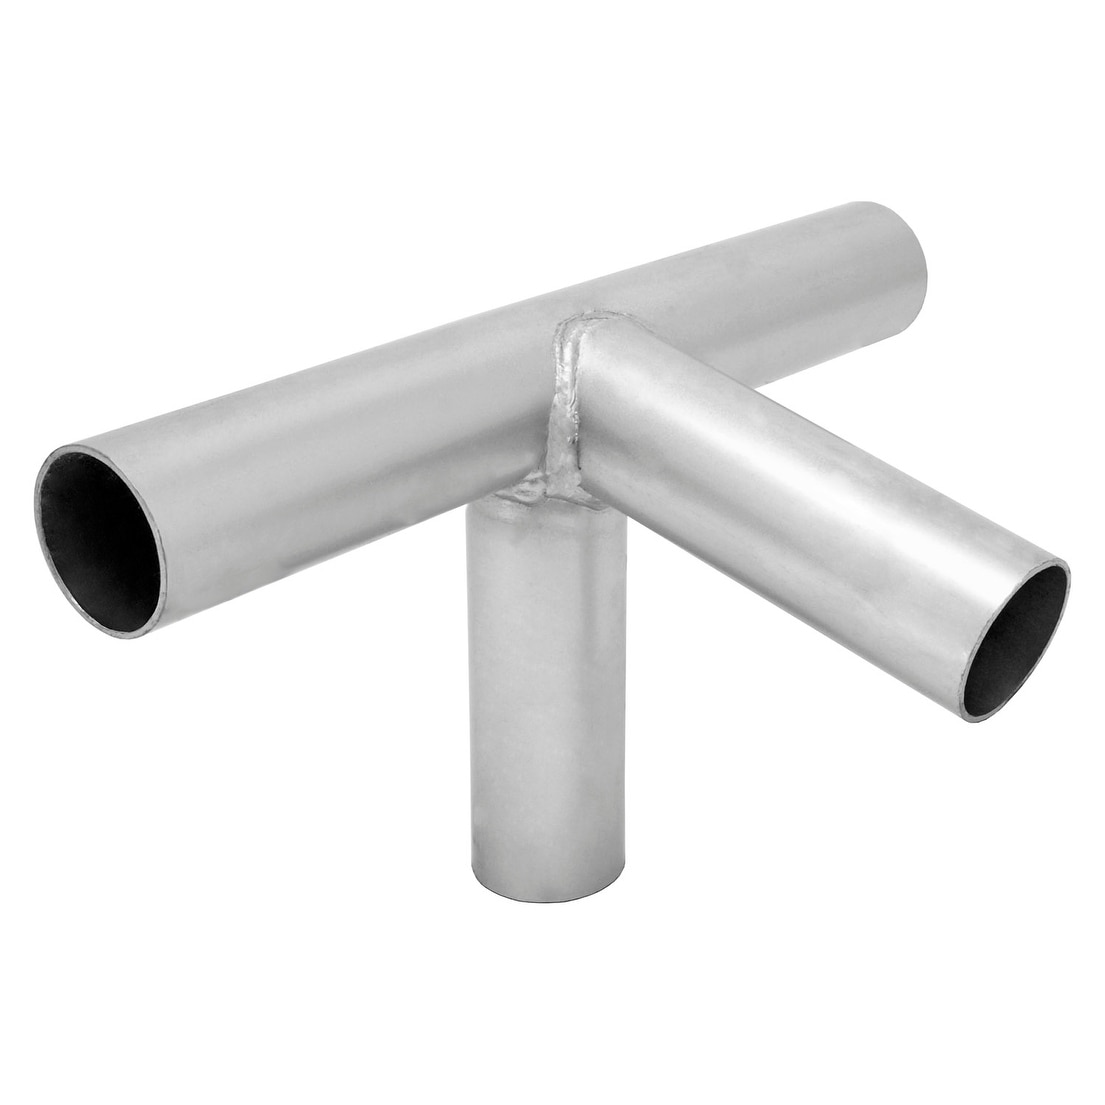 3/4" Pipe 5 way TOP CENTER LOW PEAK w/LEG CANOPY FITTING P5FA